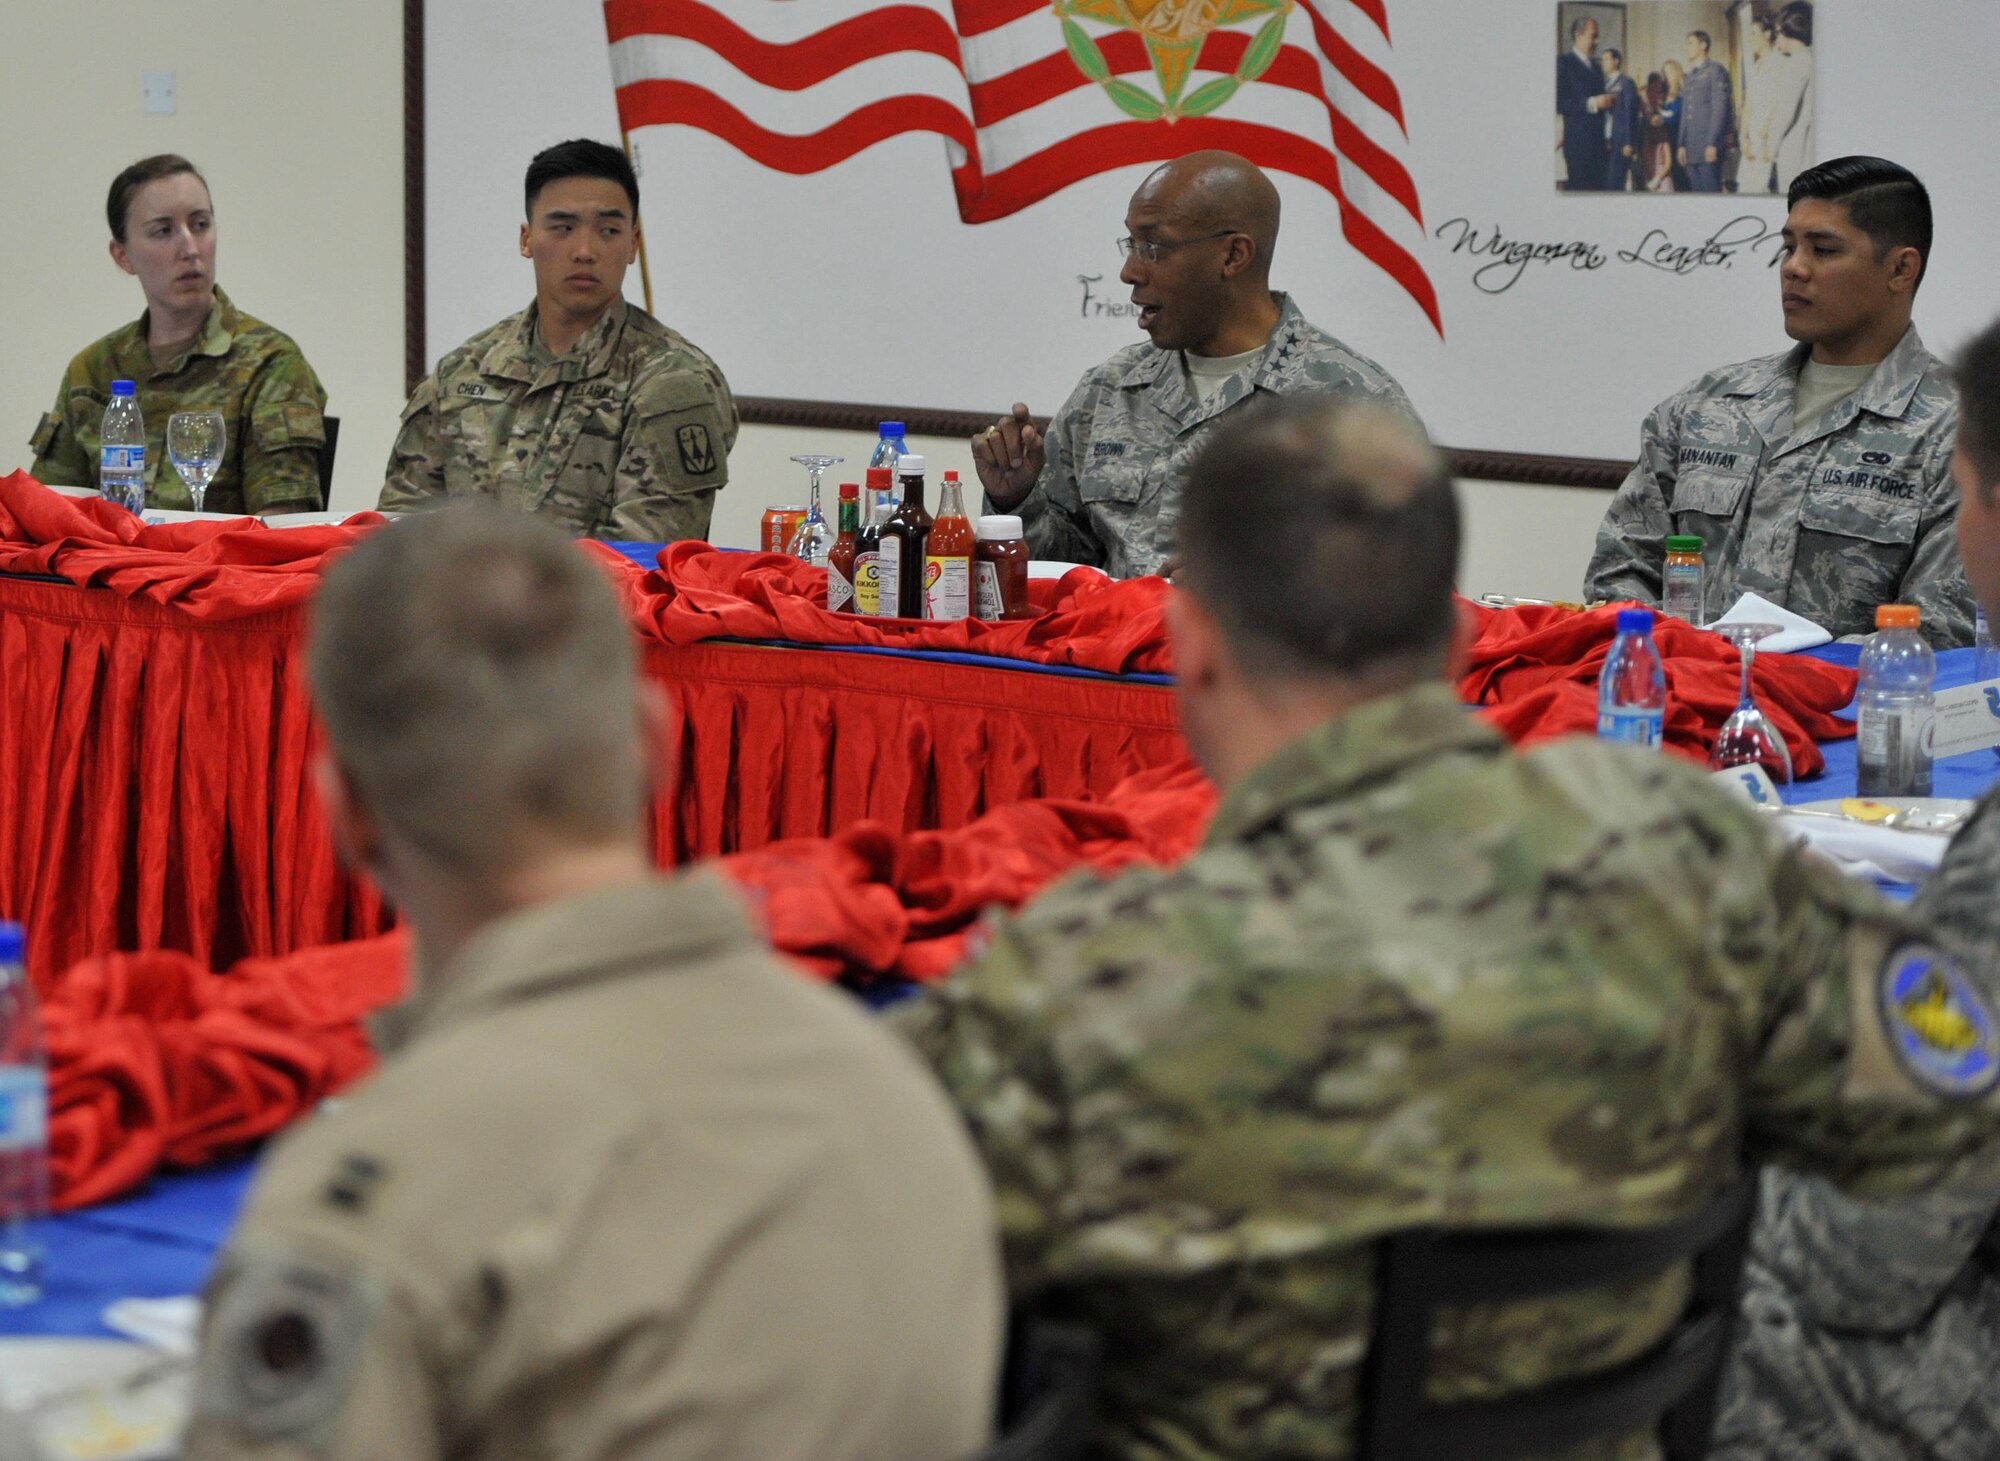 Lt. Gen. Charles Brown Jr., commander of Air Forces Central Command, speaks to a group of Airmen, Soldiers and coalition members during a luncheon at an undisclosed location in Southwest Asia, Feb. 11, 2016. Brown is responsible for developing contingency plans and conducting air operations in a 20-nation area of responsibility covering Central and Southwest Asia. (U.S. Air Force photo by Staff Sgt. Kentavist Brackin/released) 